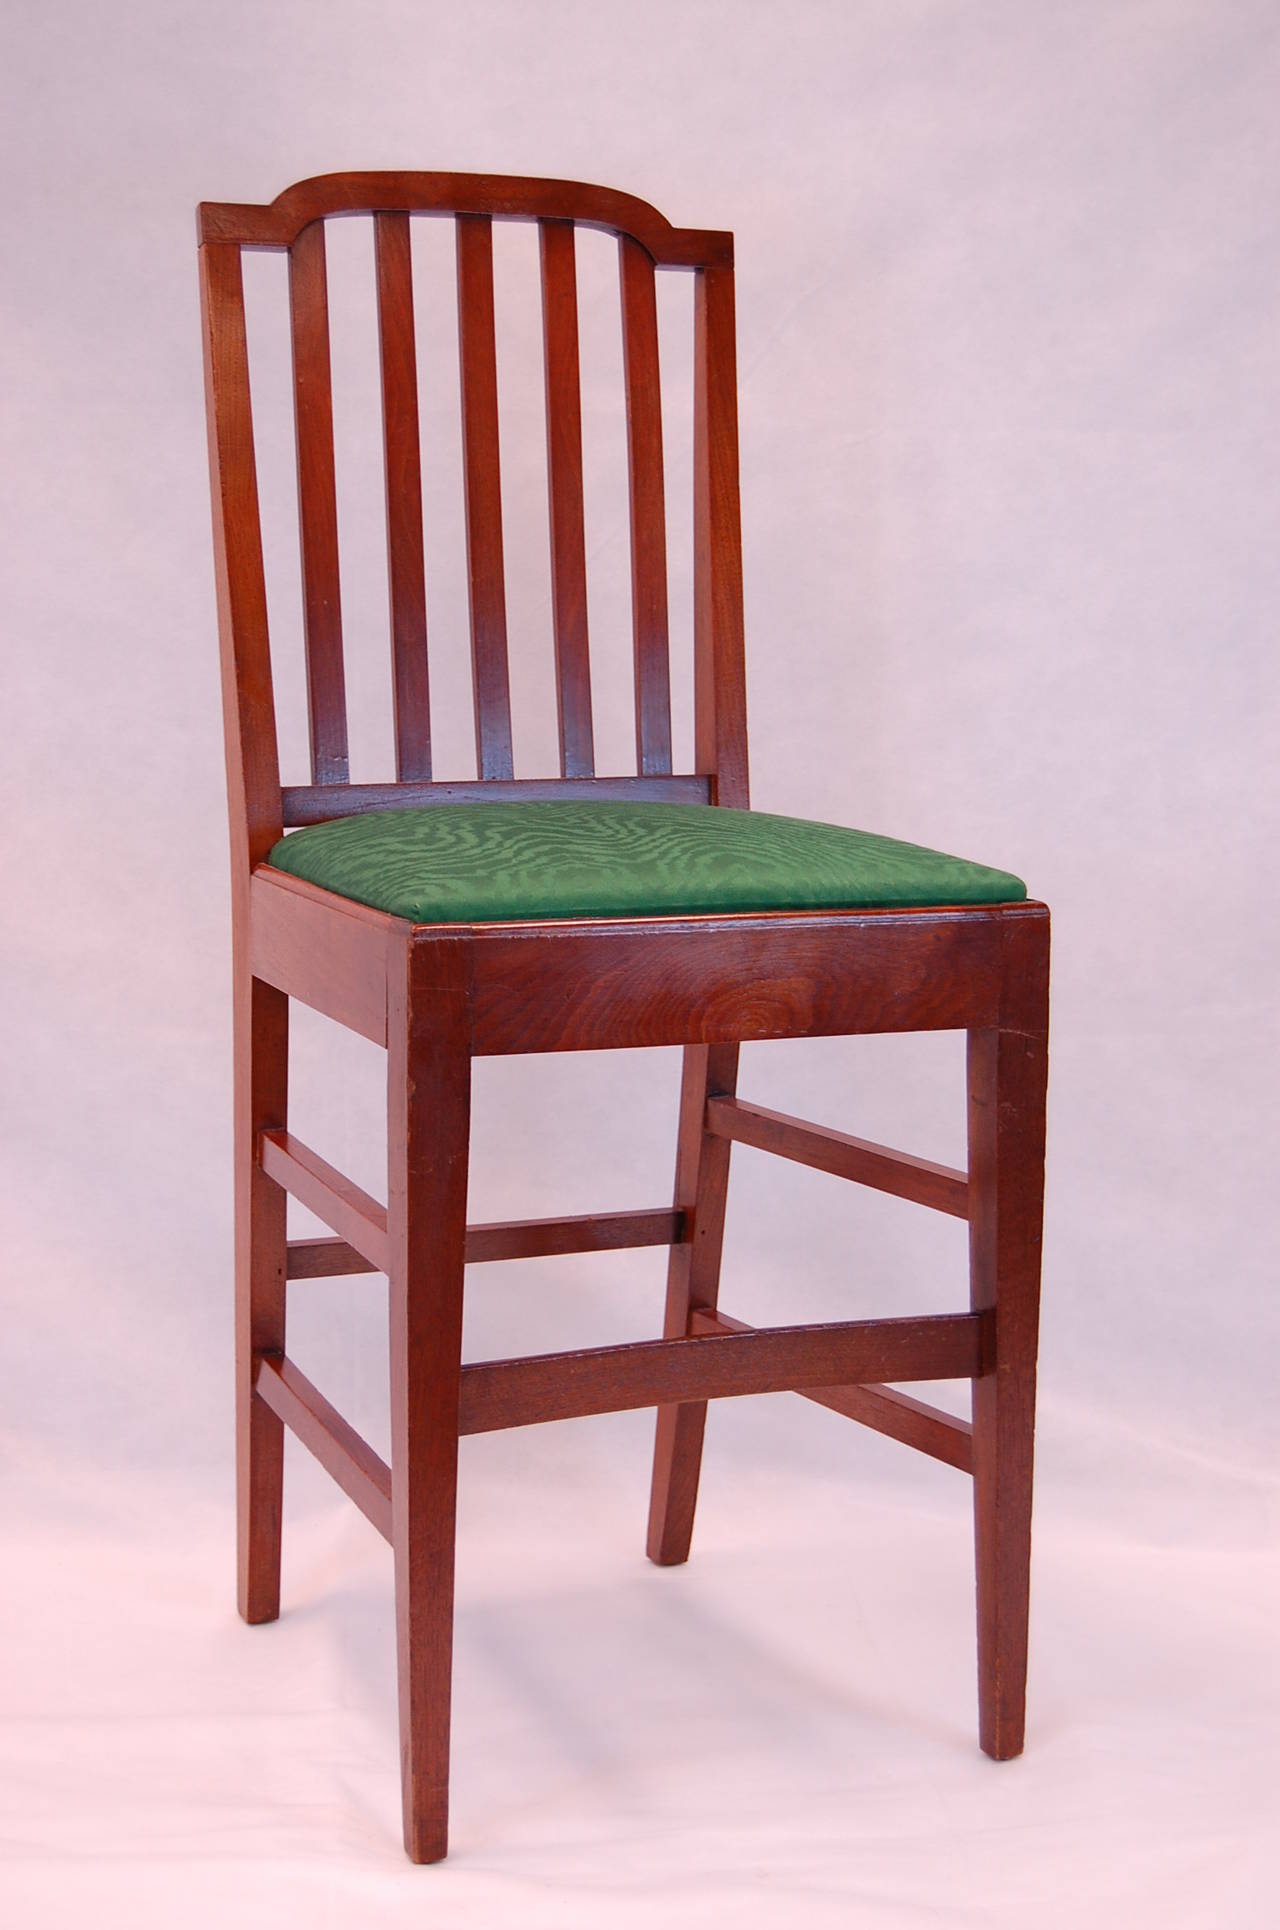 Mahogany bar chair with unusual curved front stretcher. Covered in green Clarence House moire´ cotton fabric.